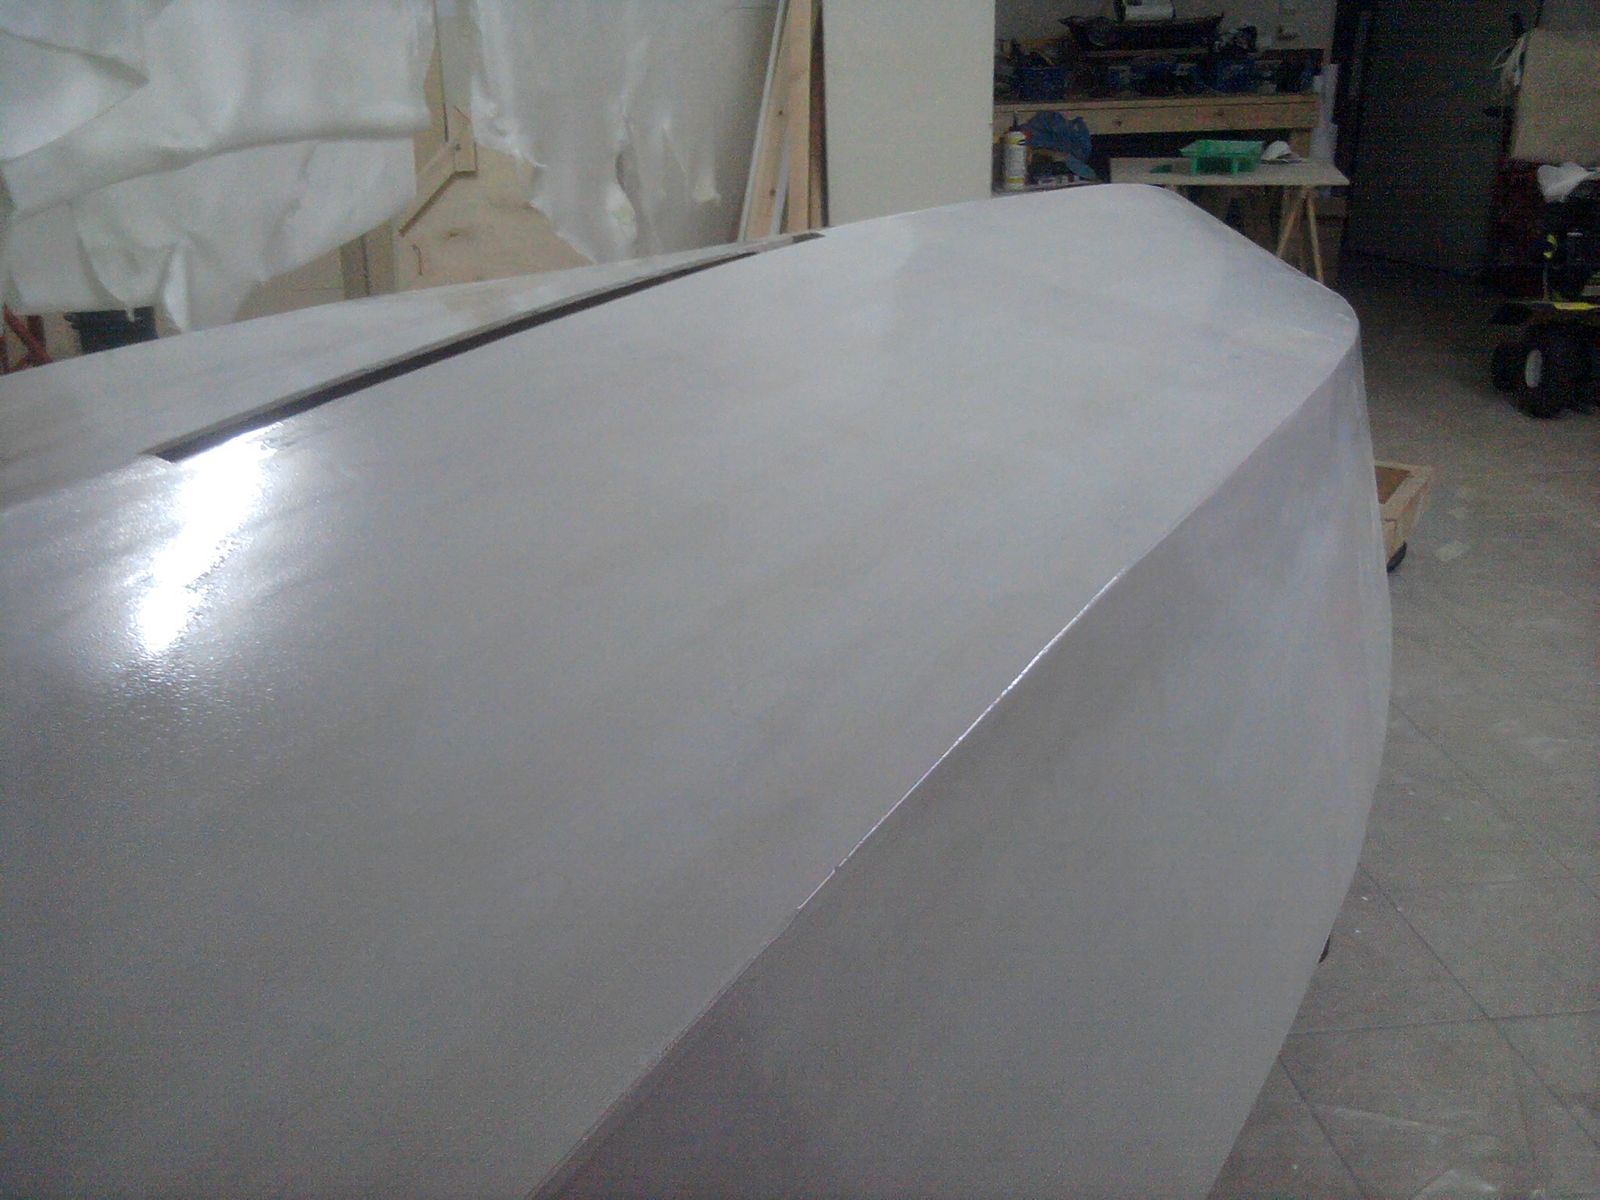 It may have been a real challenge to lay out the fiberglass on top of this but it looks really nice. I will be applying white pigmented epoxy over the flaring filler once I an done before I primer the hull. 
